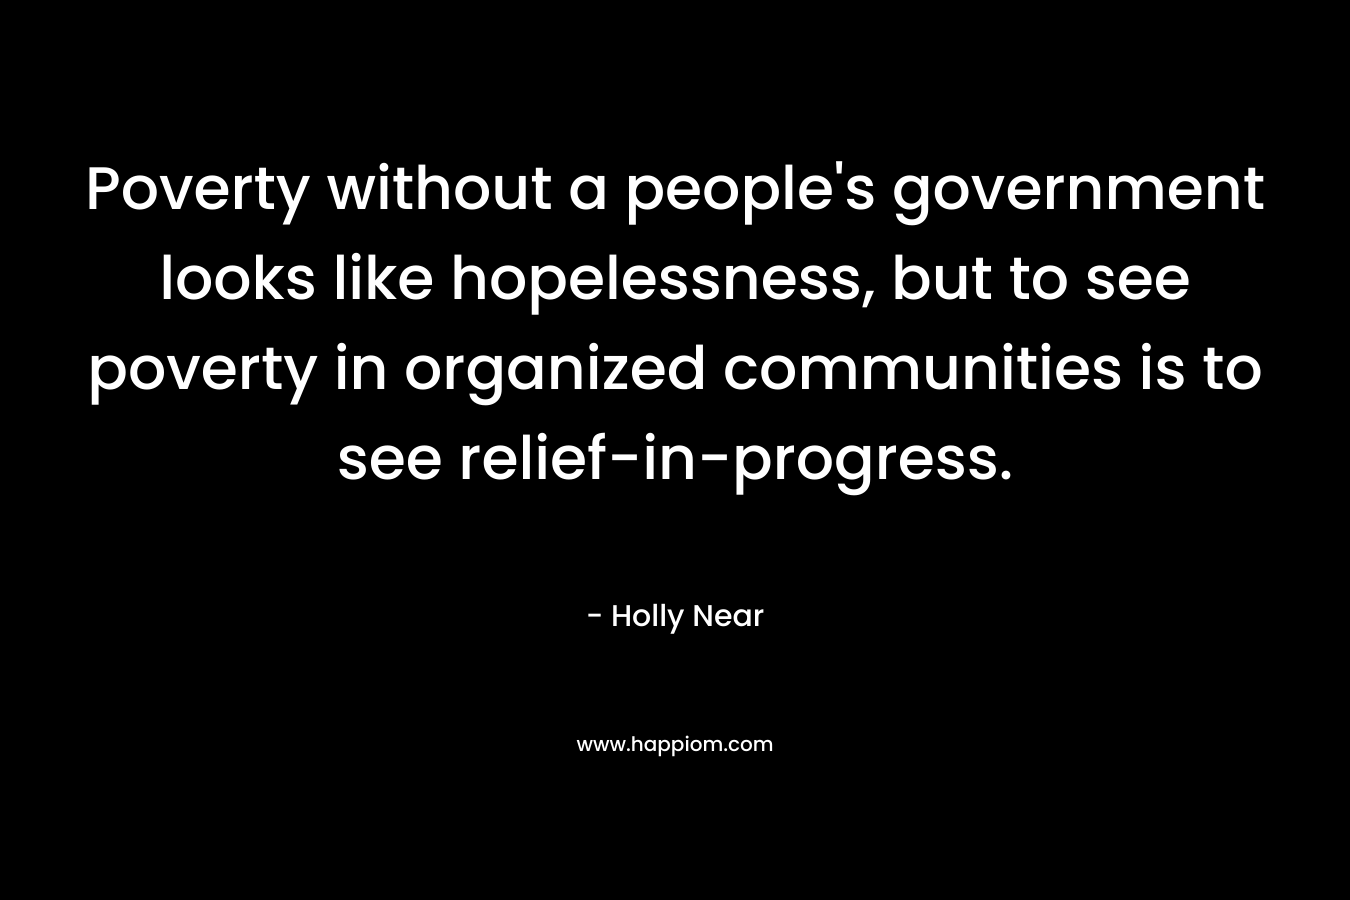 Poverty without a people’s government looks like hopelessness, but to see poverty in organized communities is to see relief-in-progress. – Holly Near